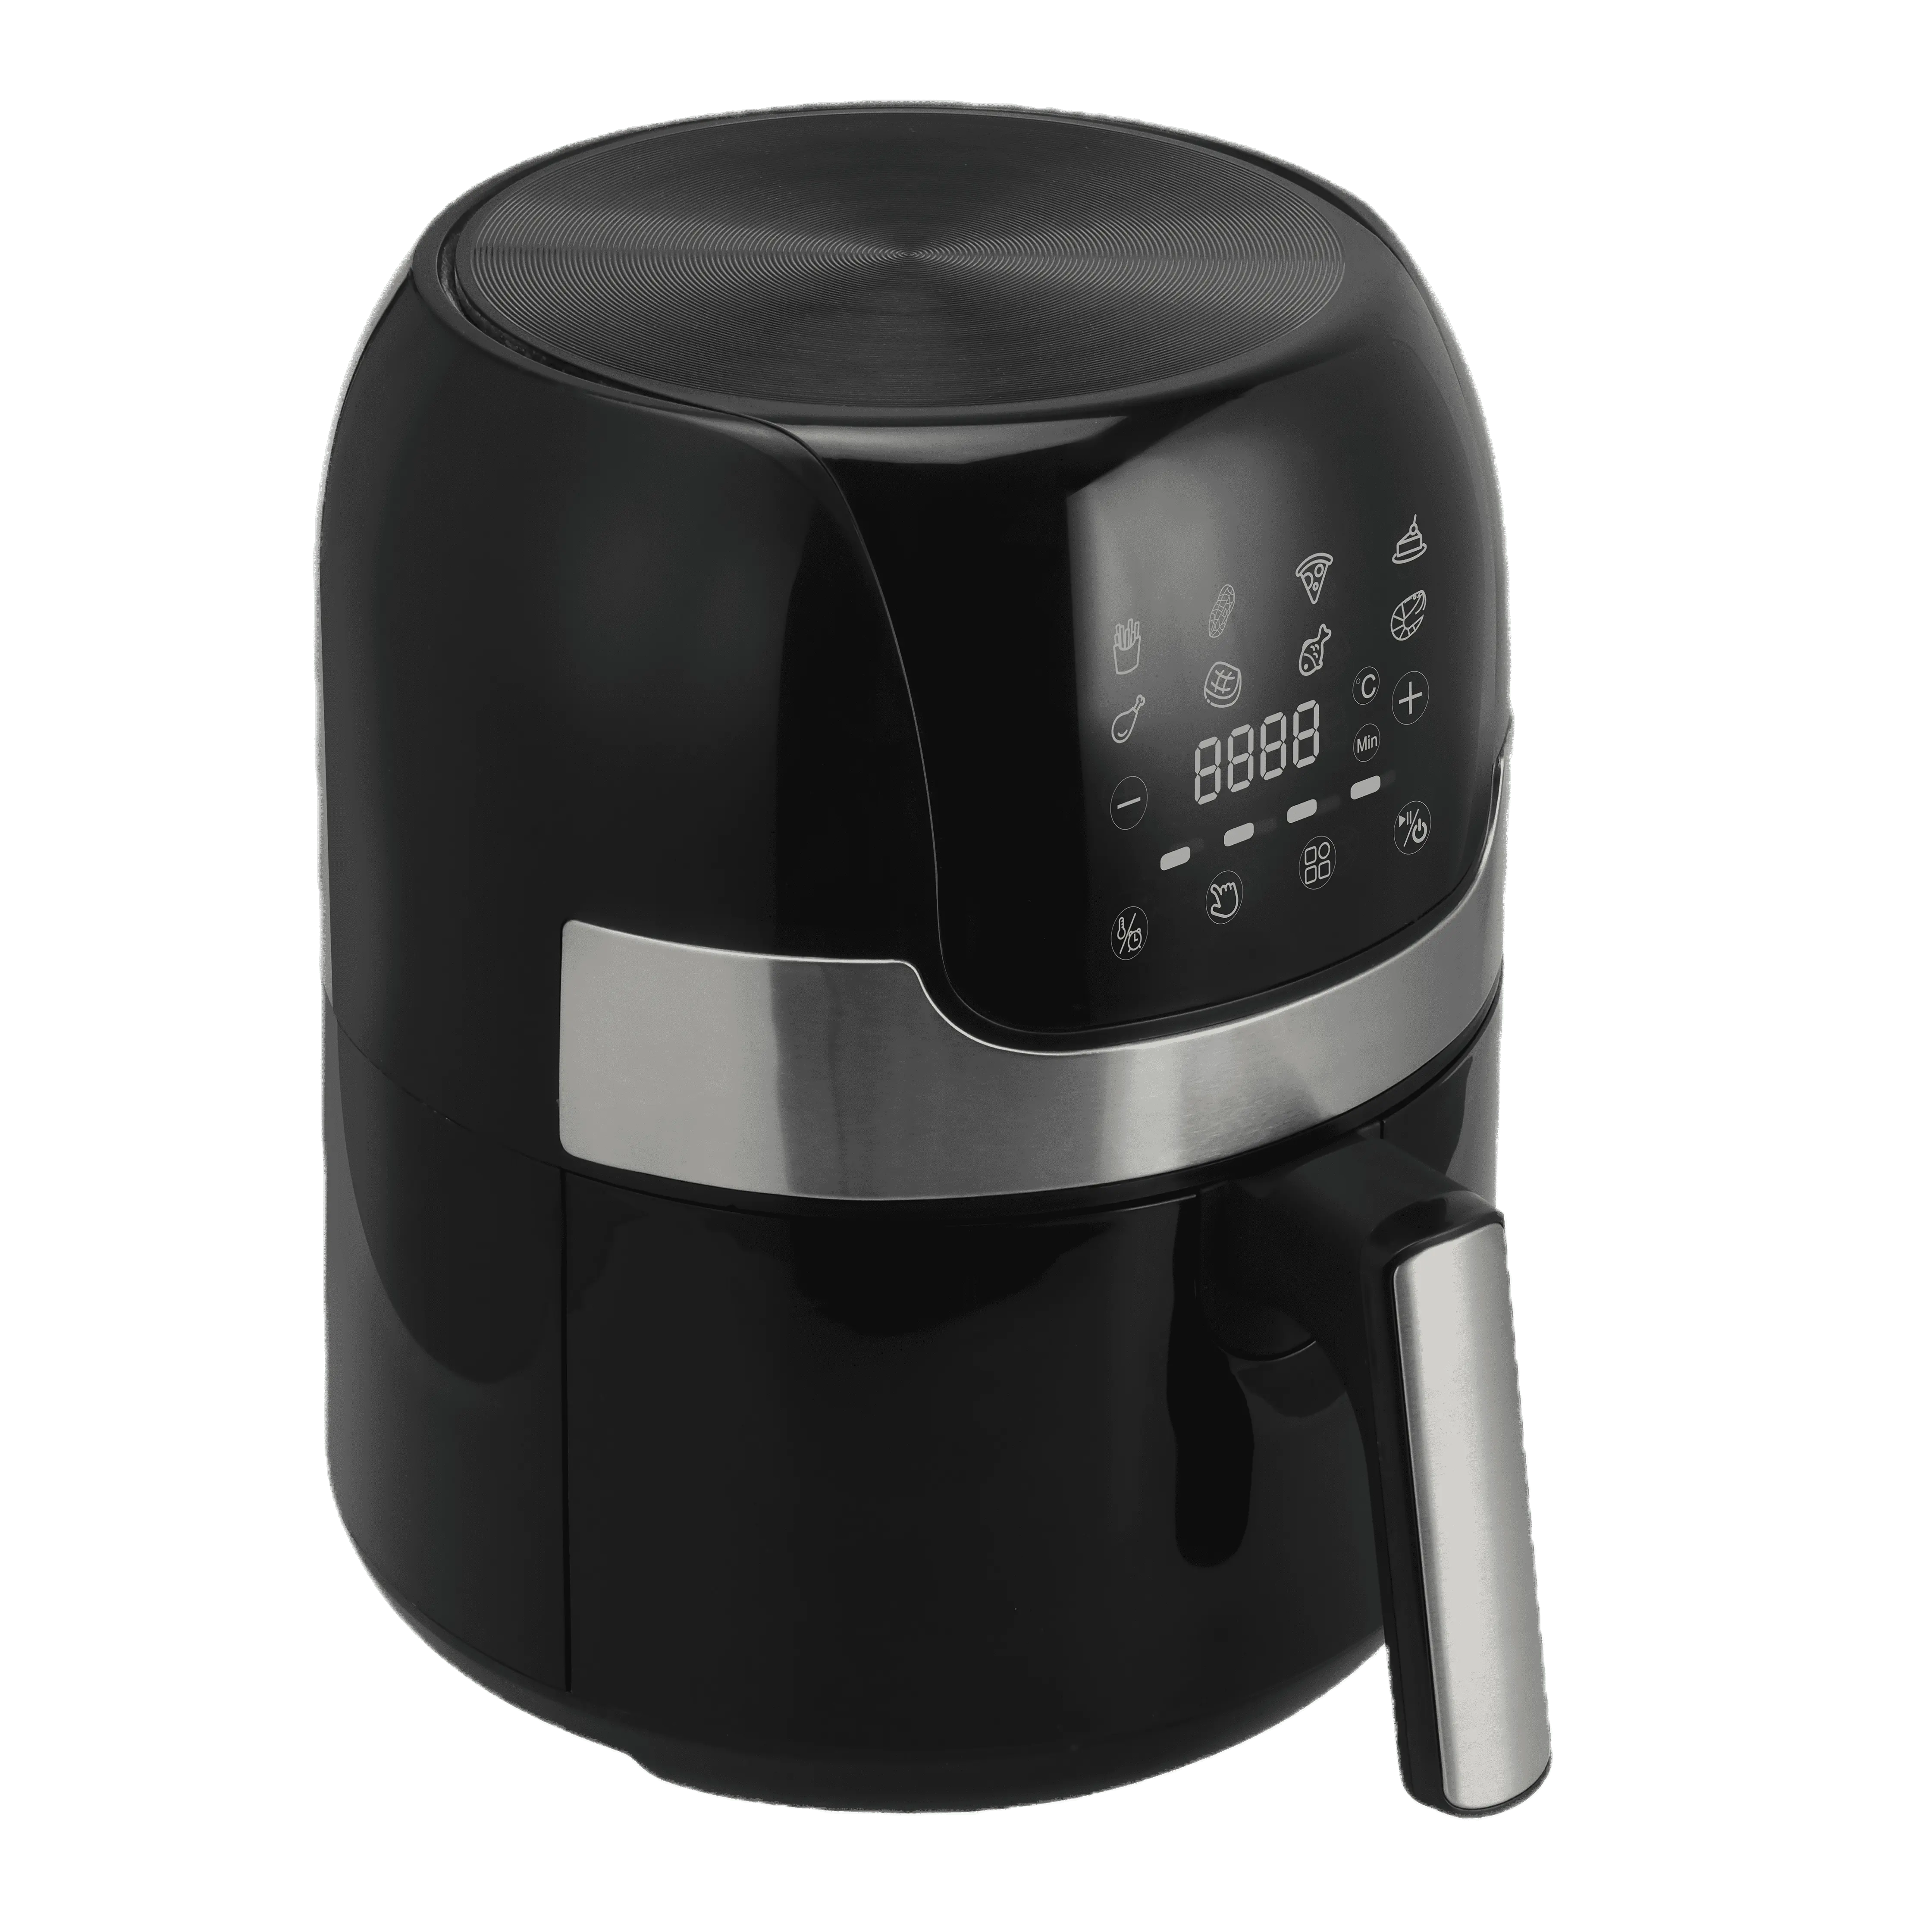 Tywit Good Price High Quality Household Oil Free Small Size Custom Hot Air Fryer black